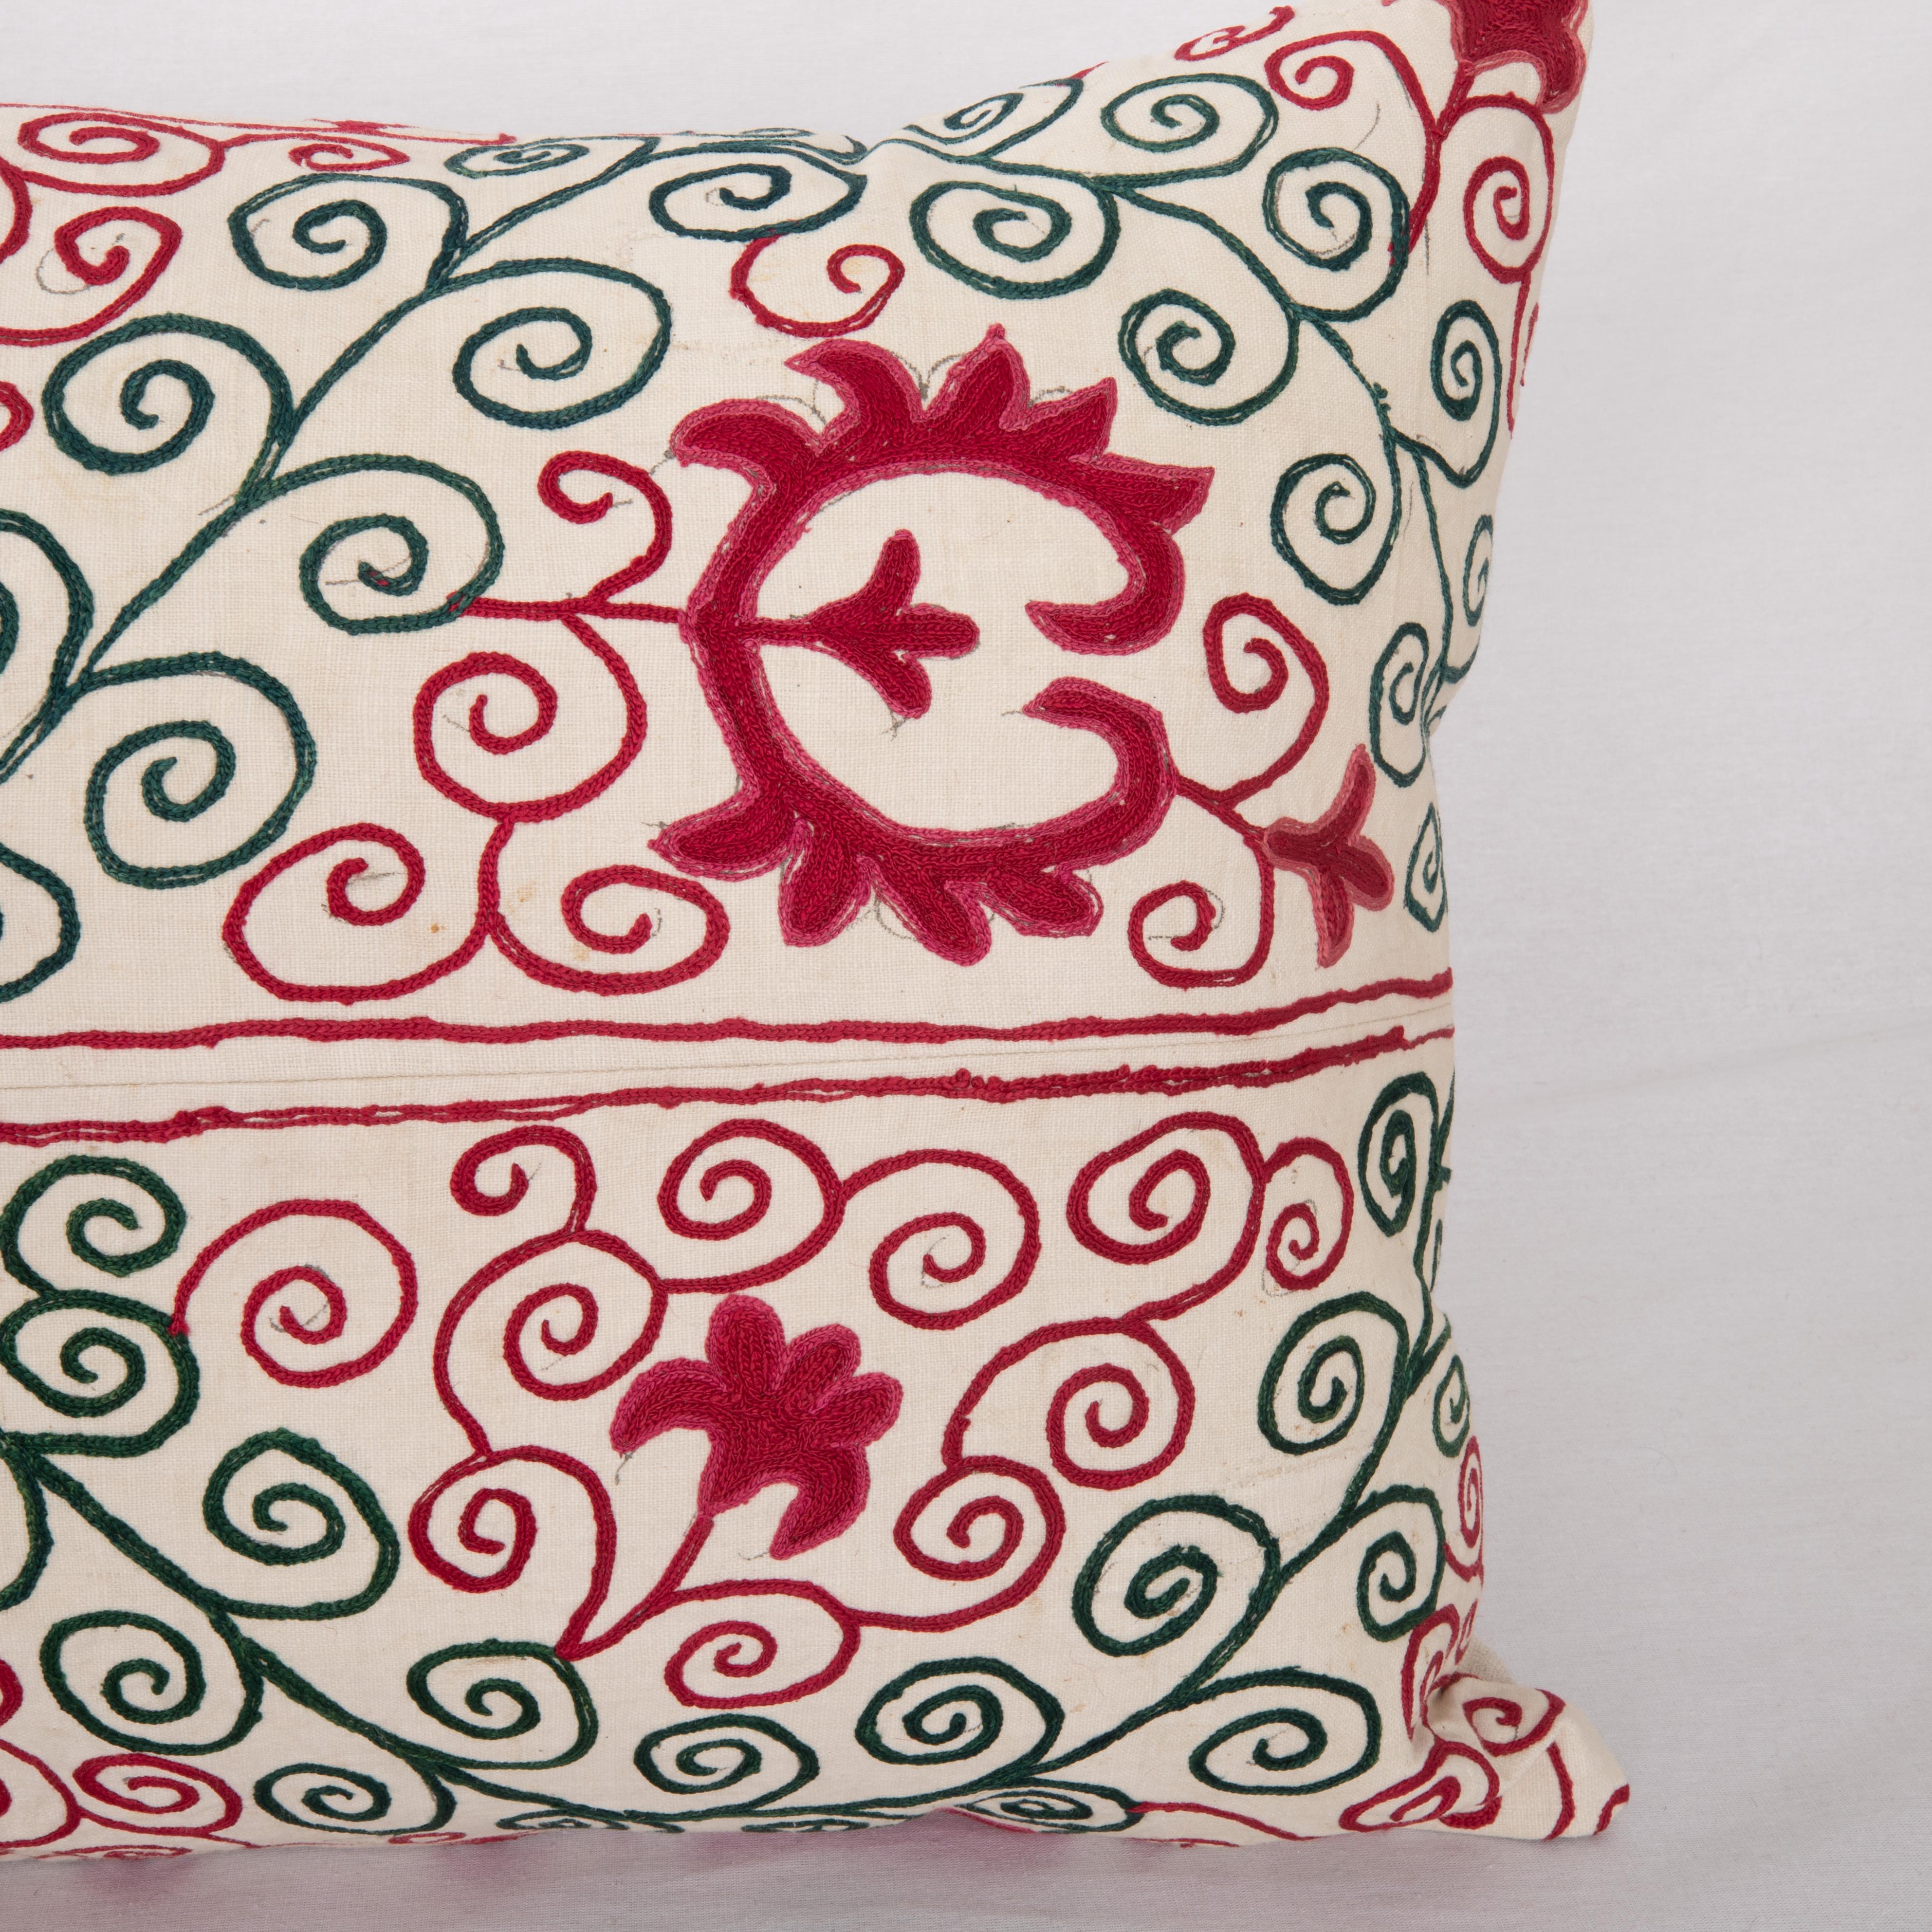 Embroidered Suzani Pillow Case Made from an Antique Suzani, Early 20th C For Sale